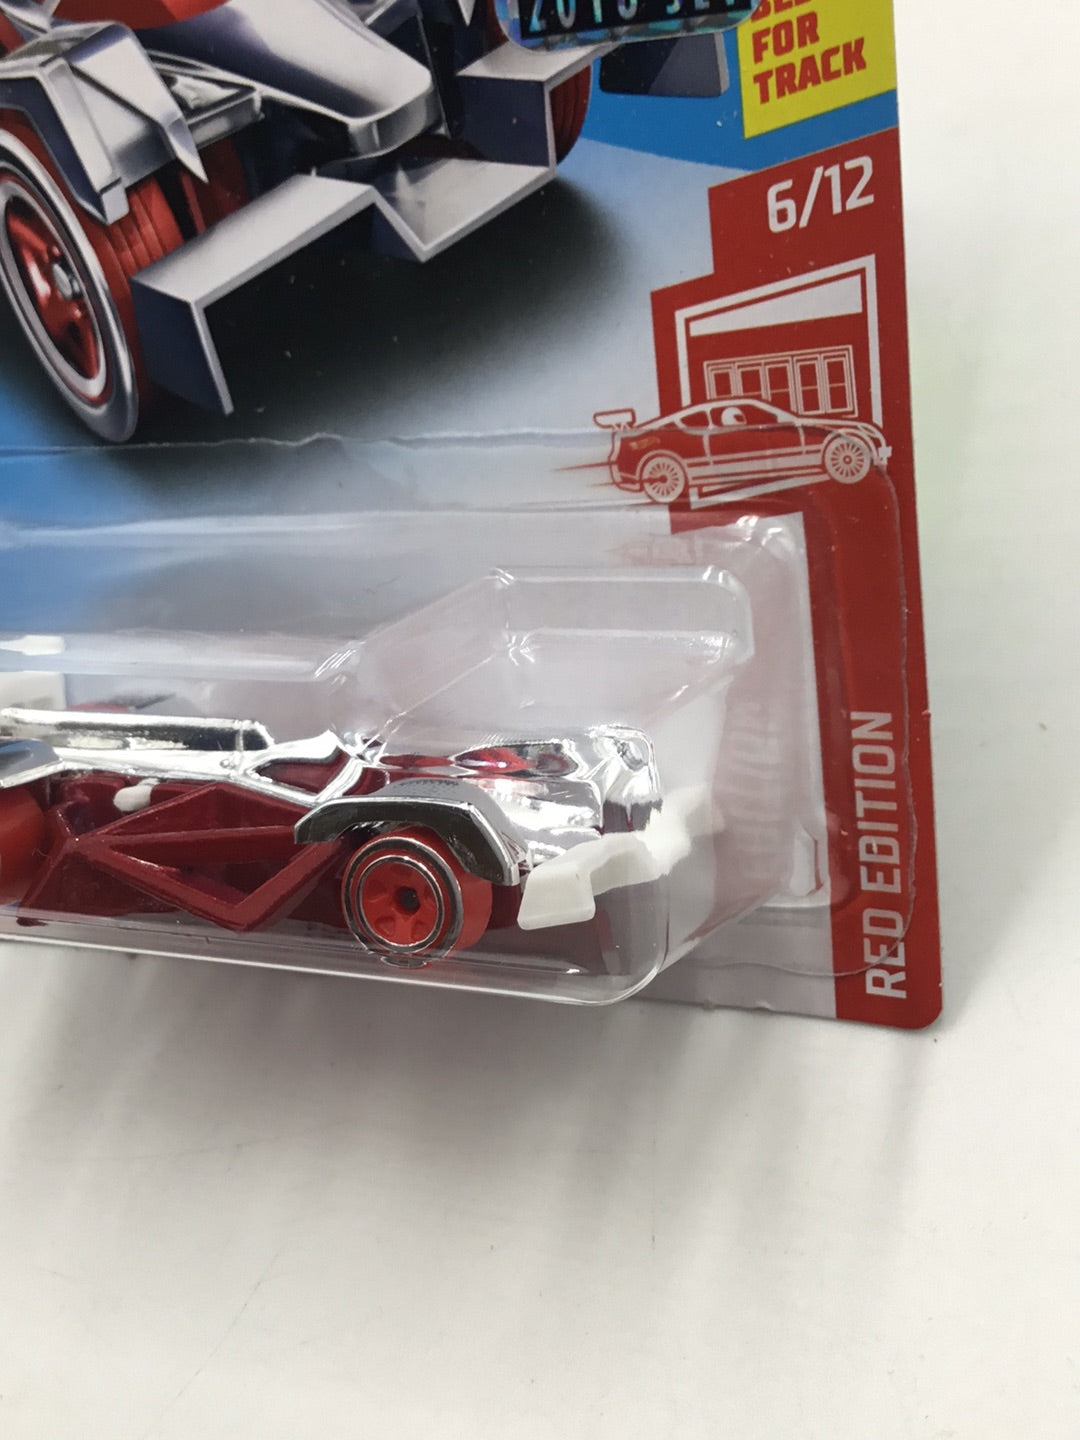 2018 hot wheels red edition #6 Flash Drive target red factory sealed sticker